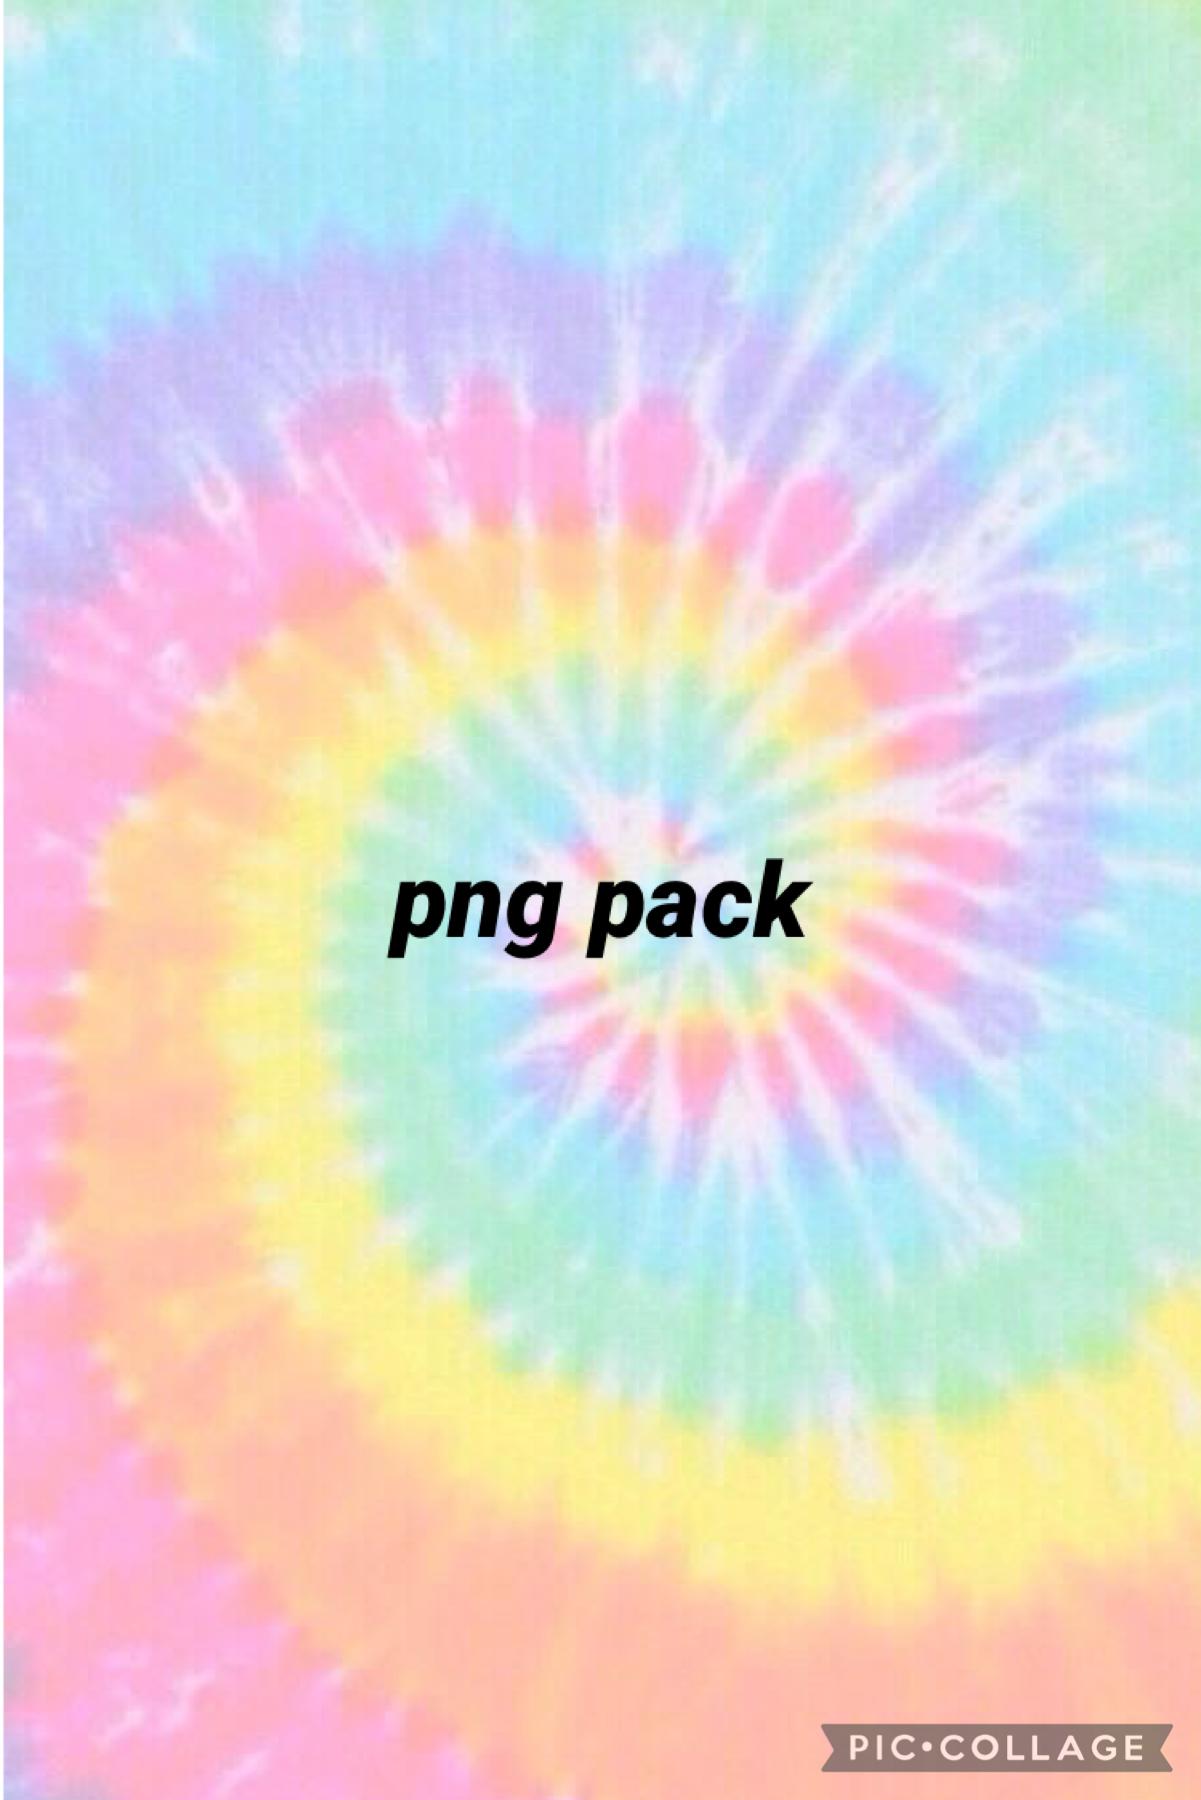 If you won a png pack this is for you!